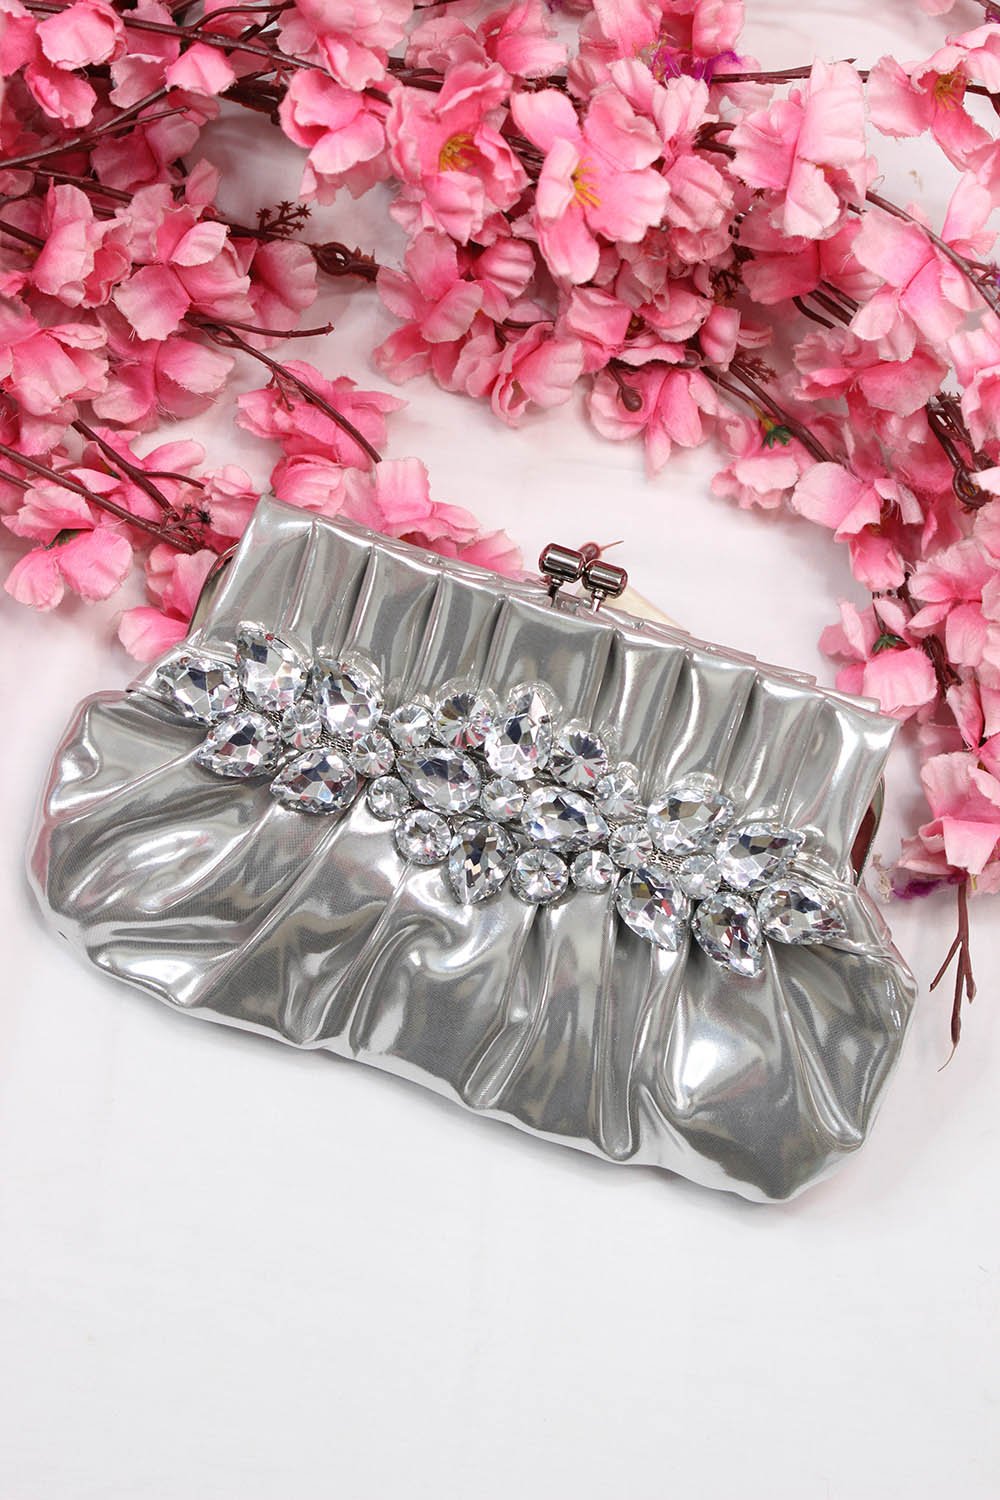 Sparkle & Shine - Make a Statement with Our Exclusive Silver Clutch Sling Bag Collection - Perfect for Any Outfit and Occasion